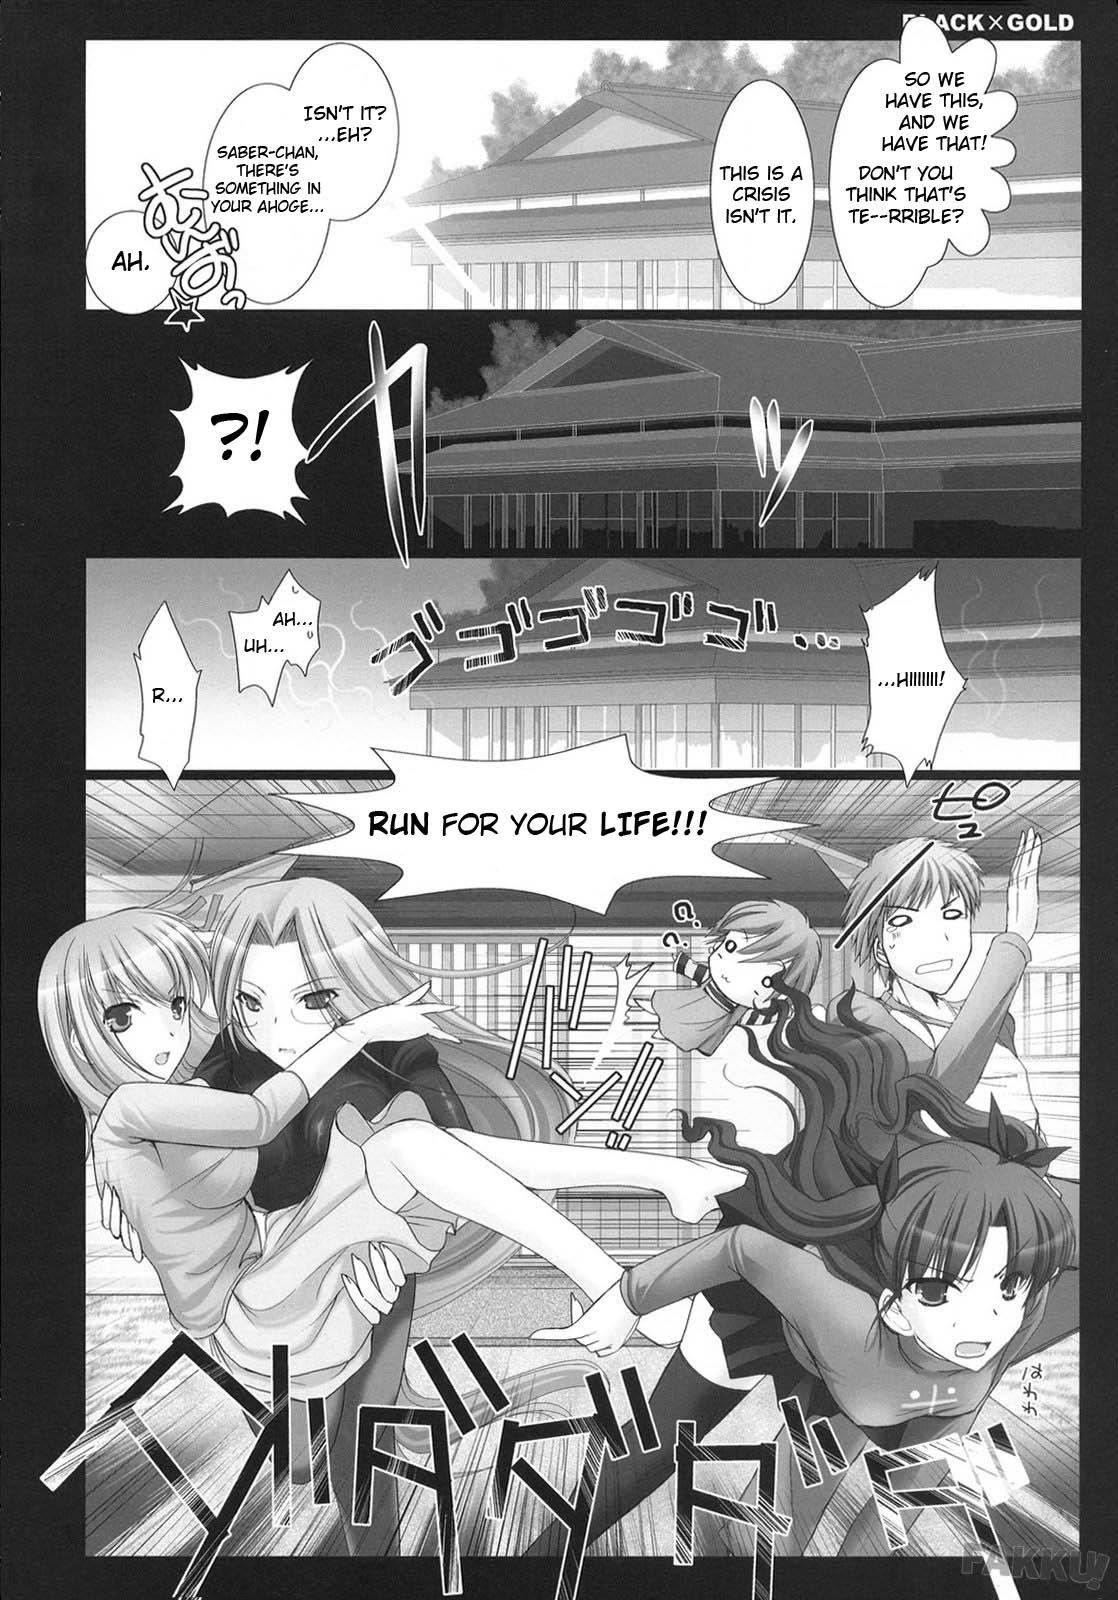 Euro BLACKxGOLD - Fate stay night Fate hollow ataraxia Firsttime - Page 5